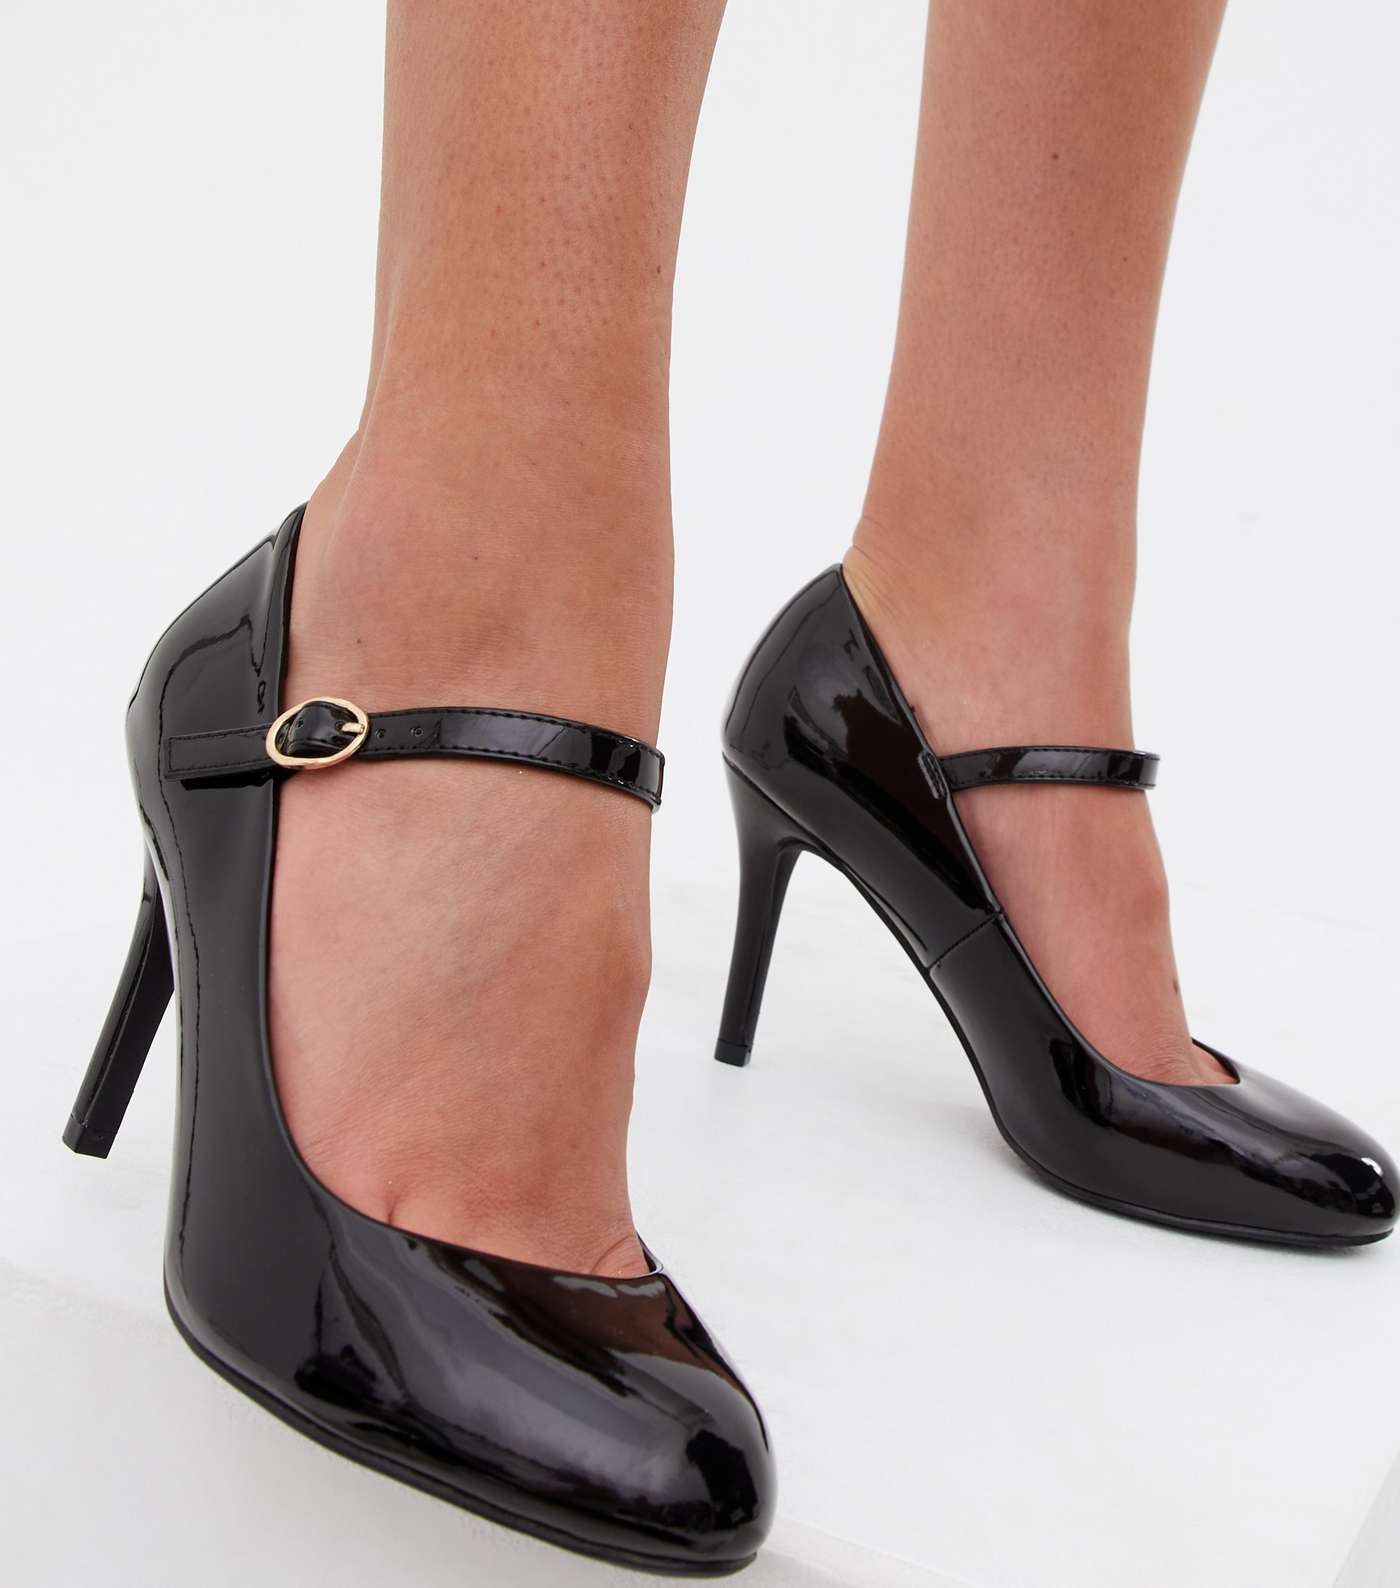 Wide Fit Black Patent Stiletto Heel Mary Jane Shoes Image 2